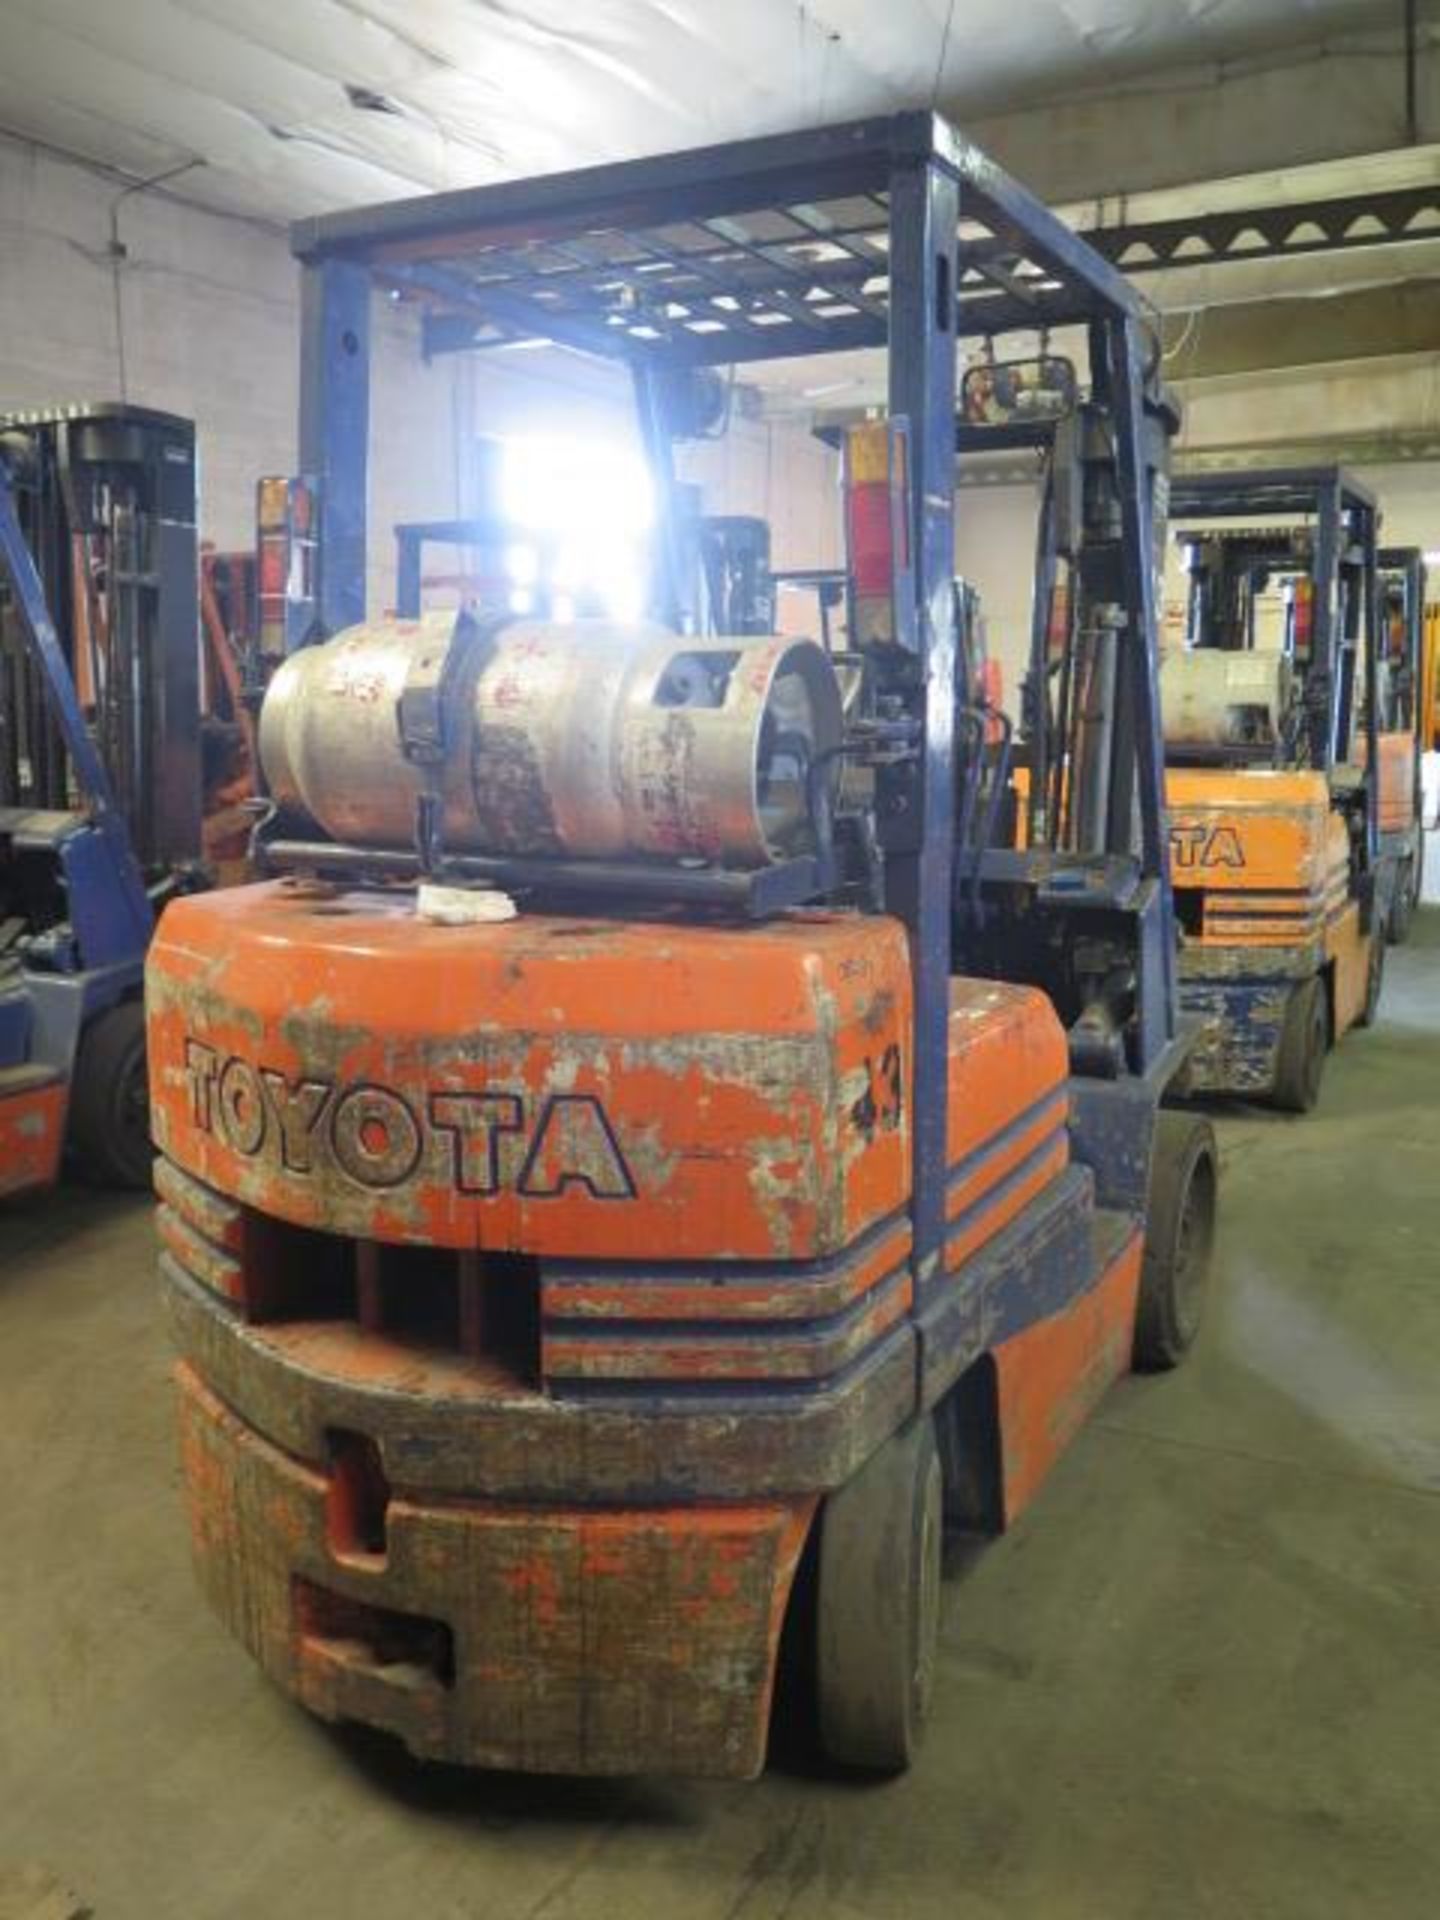 Toyota 5FGC25 5000 Lb Cap LPG Forklift s/n 18534 w/ 3-Stage Mast, 185” Lift Height, Cushion Tires - Image 3 of 10